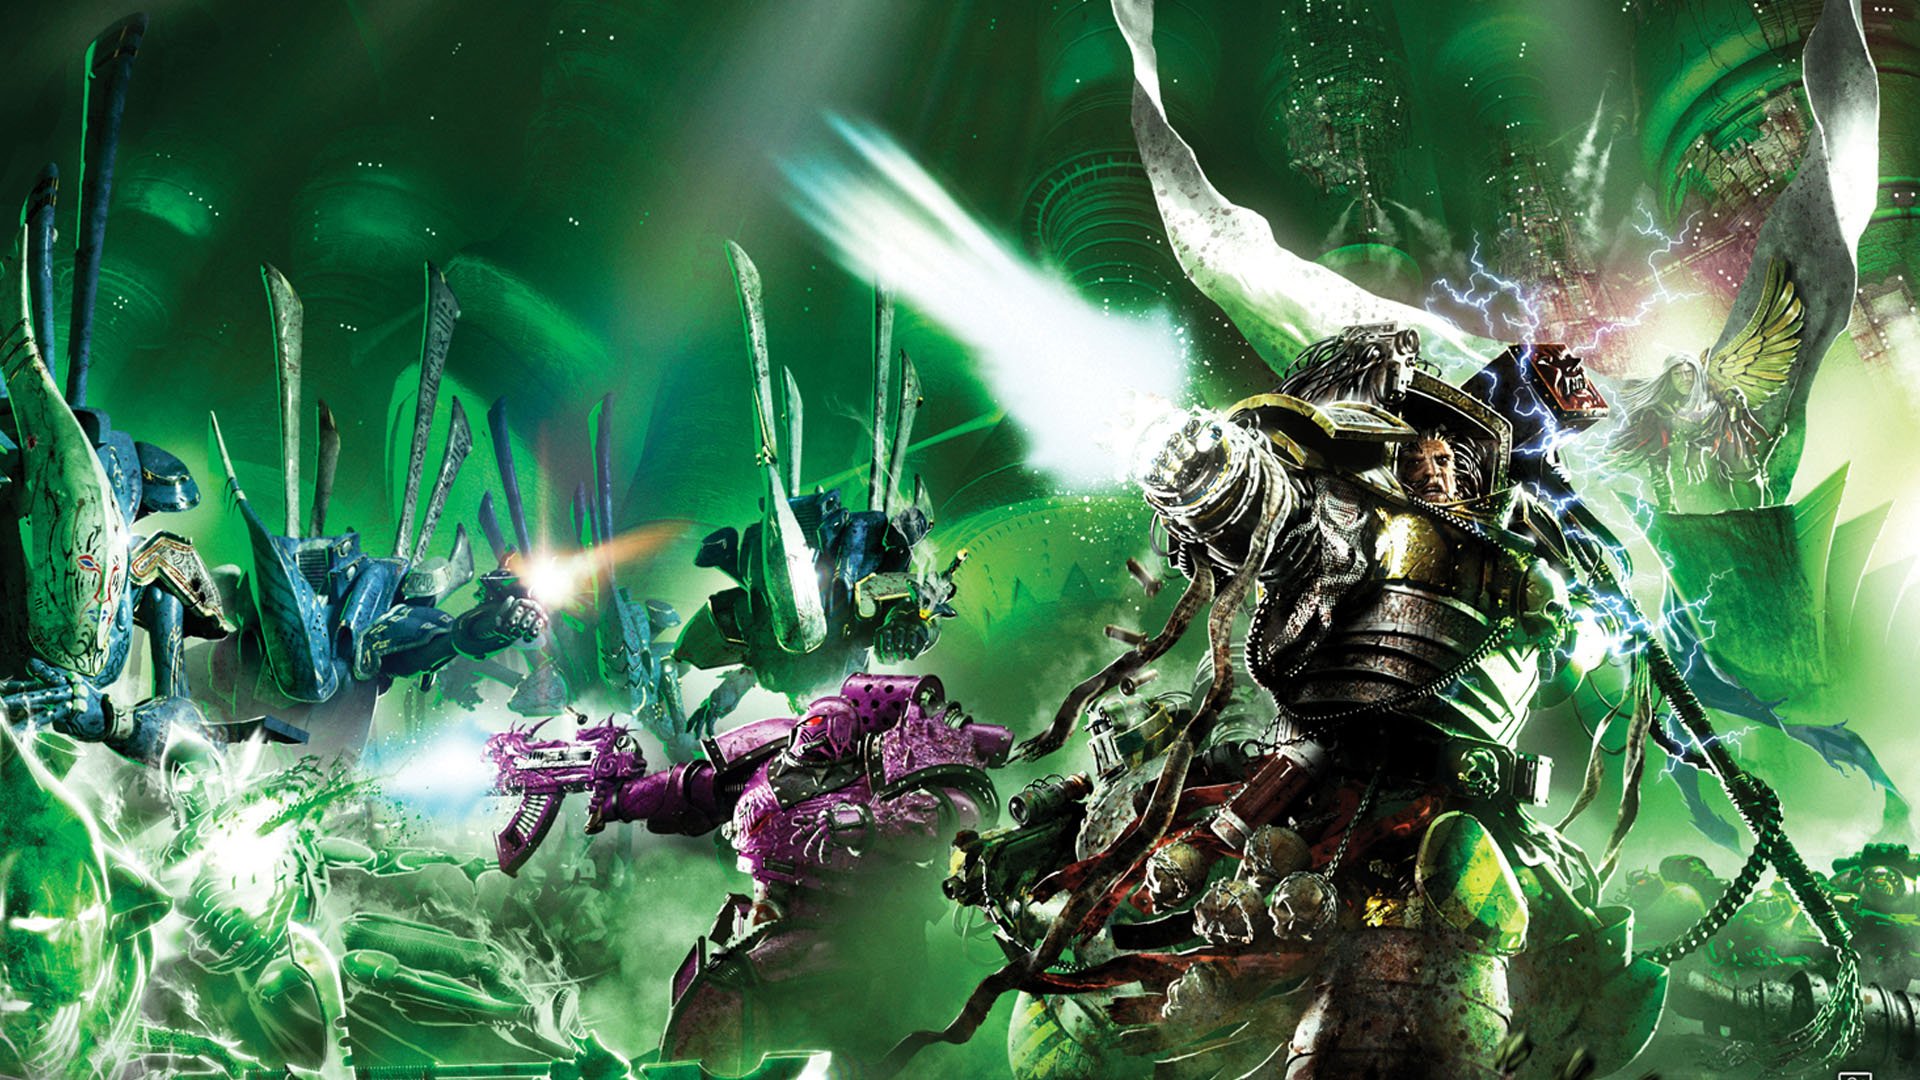 Warhammer 40k Perturabo guide - Games Workshop artwork showing Perturabo and his Primarch brother Fulgrim fighting Eldar Wraith Constructs